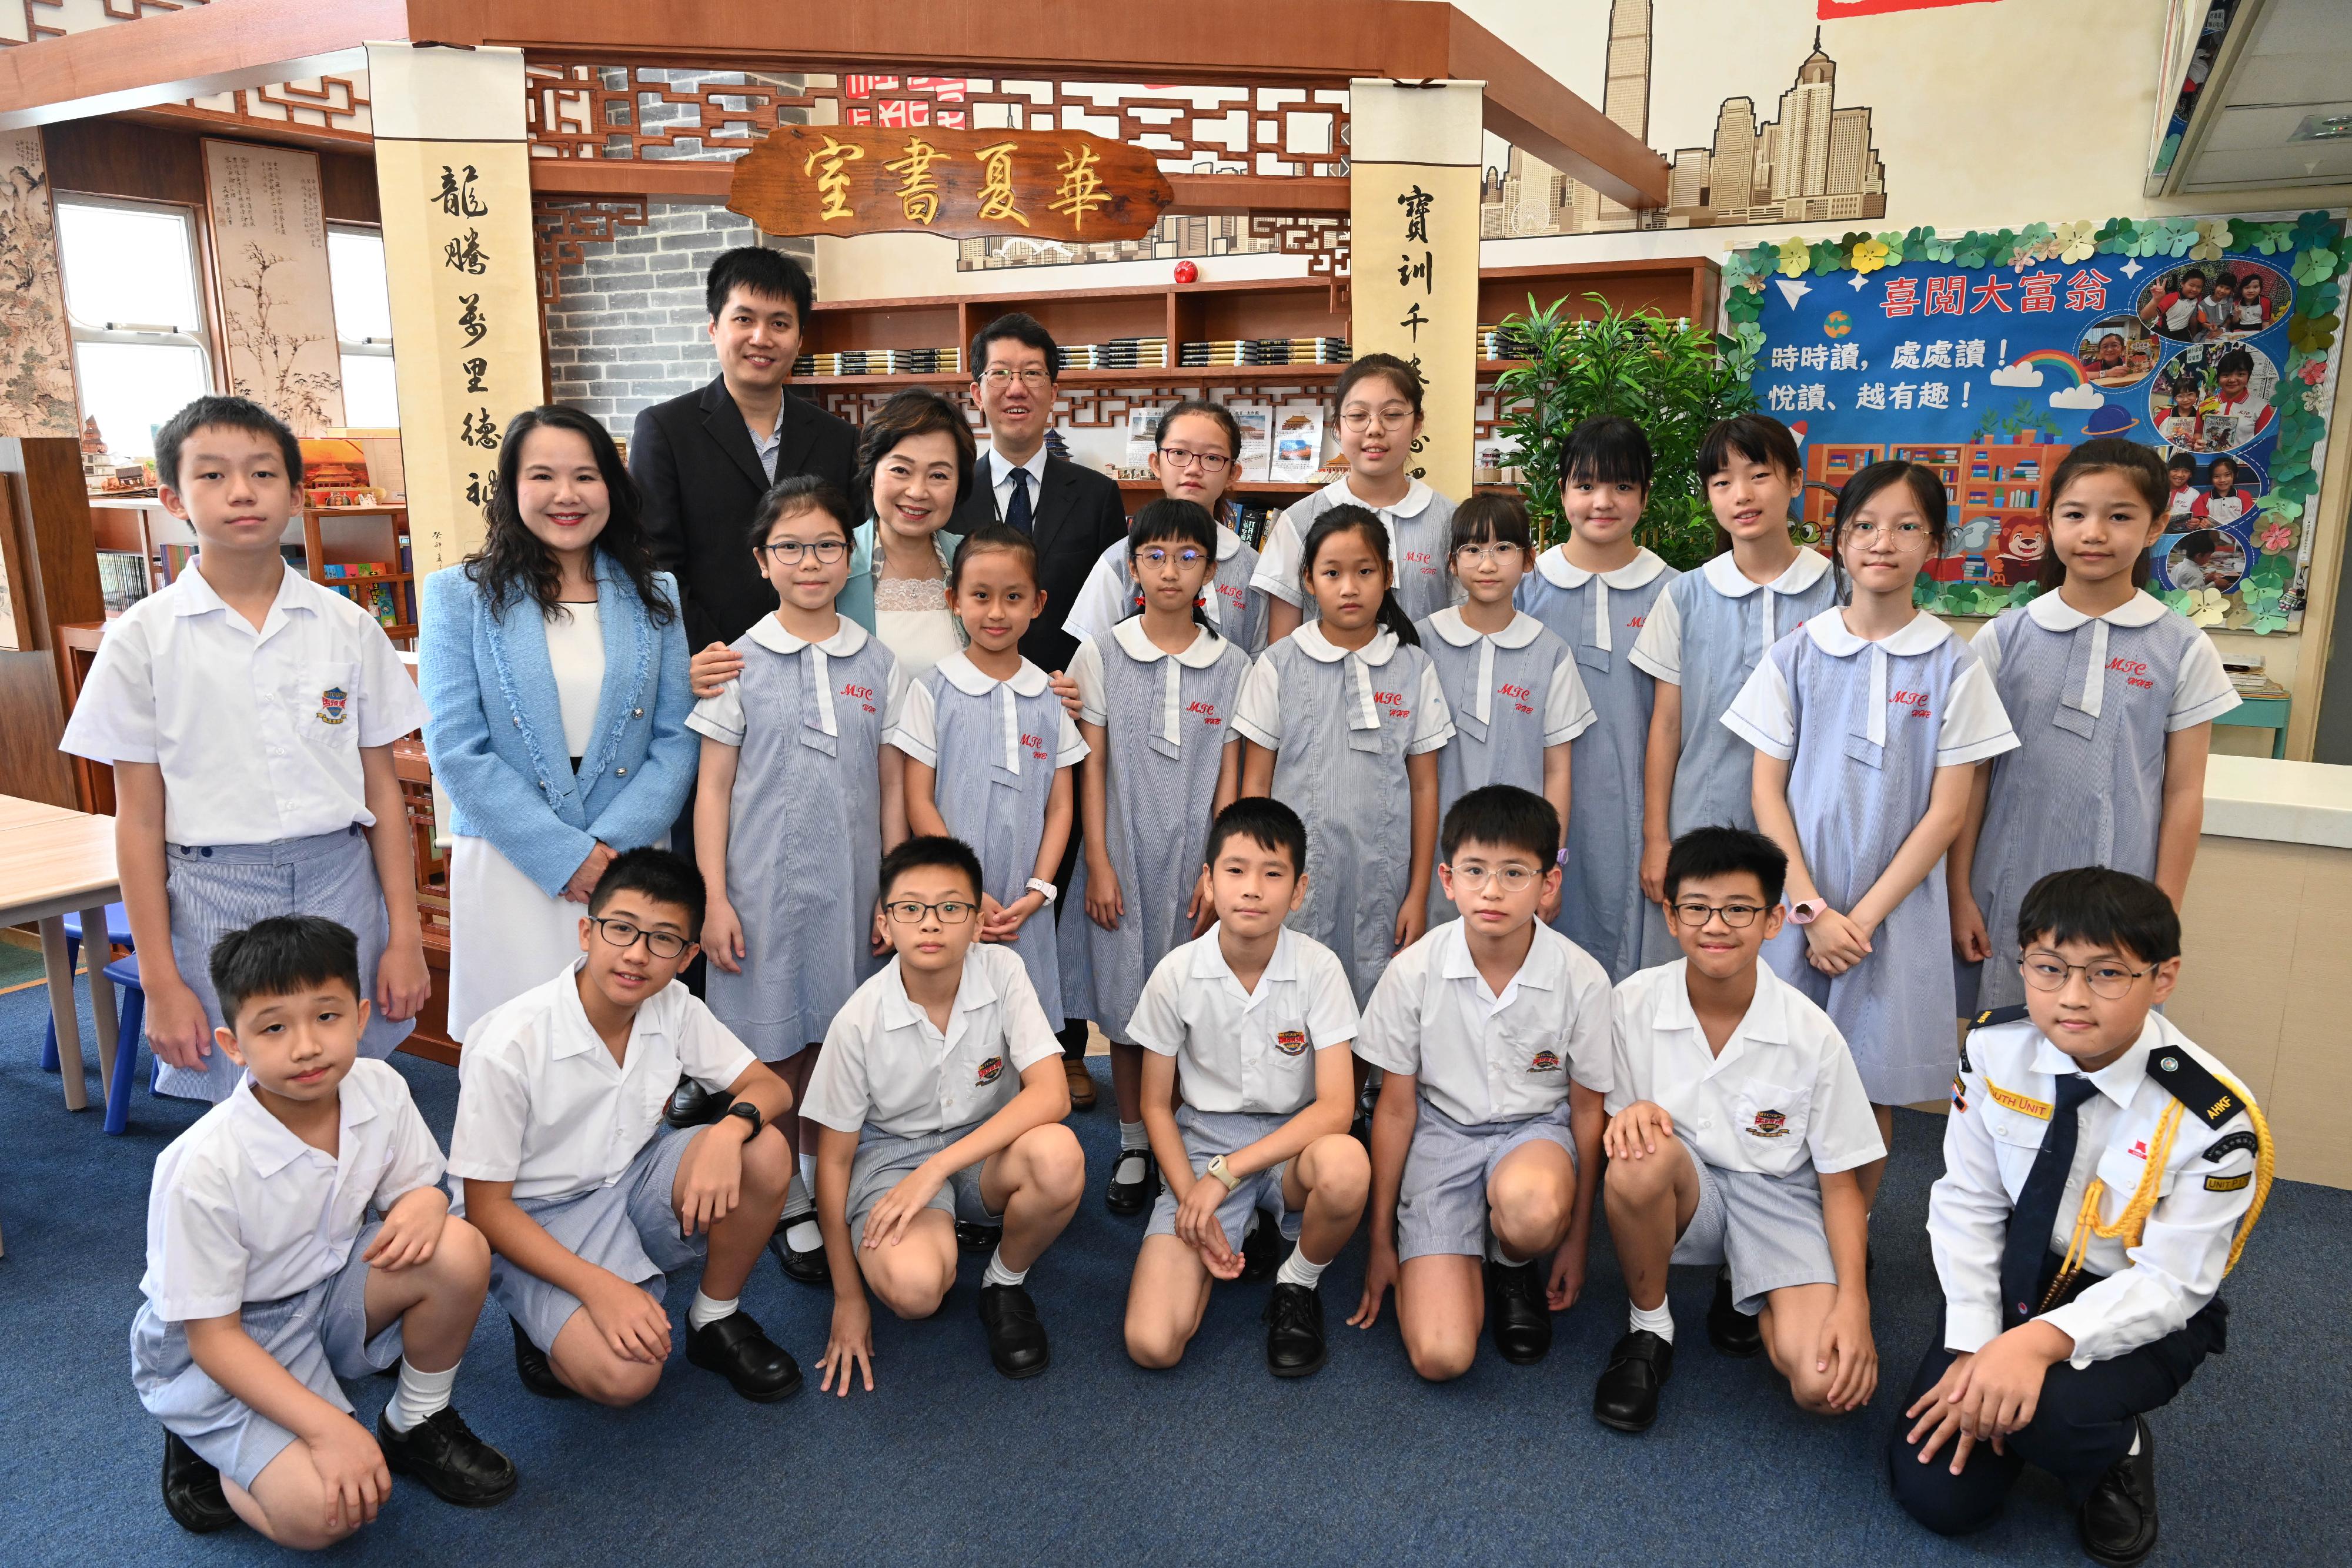 The Secretary for Education, Dr Choi Yuk-lin, visited Ma Tau Chung Government Primary School (Hung Hom Bay) on the first school day today (September 4). Photo shows Dr Choi (third row, second left) with students after visiting the newly opened reading corner for promoting Chinese culture at the school.